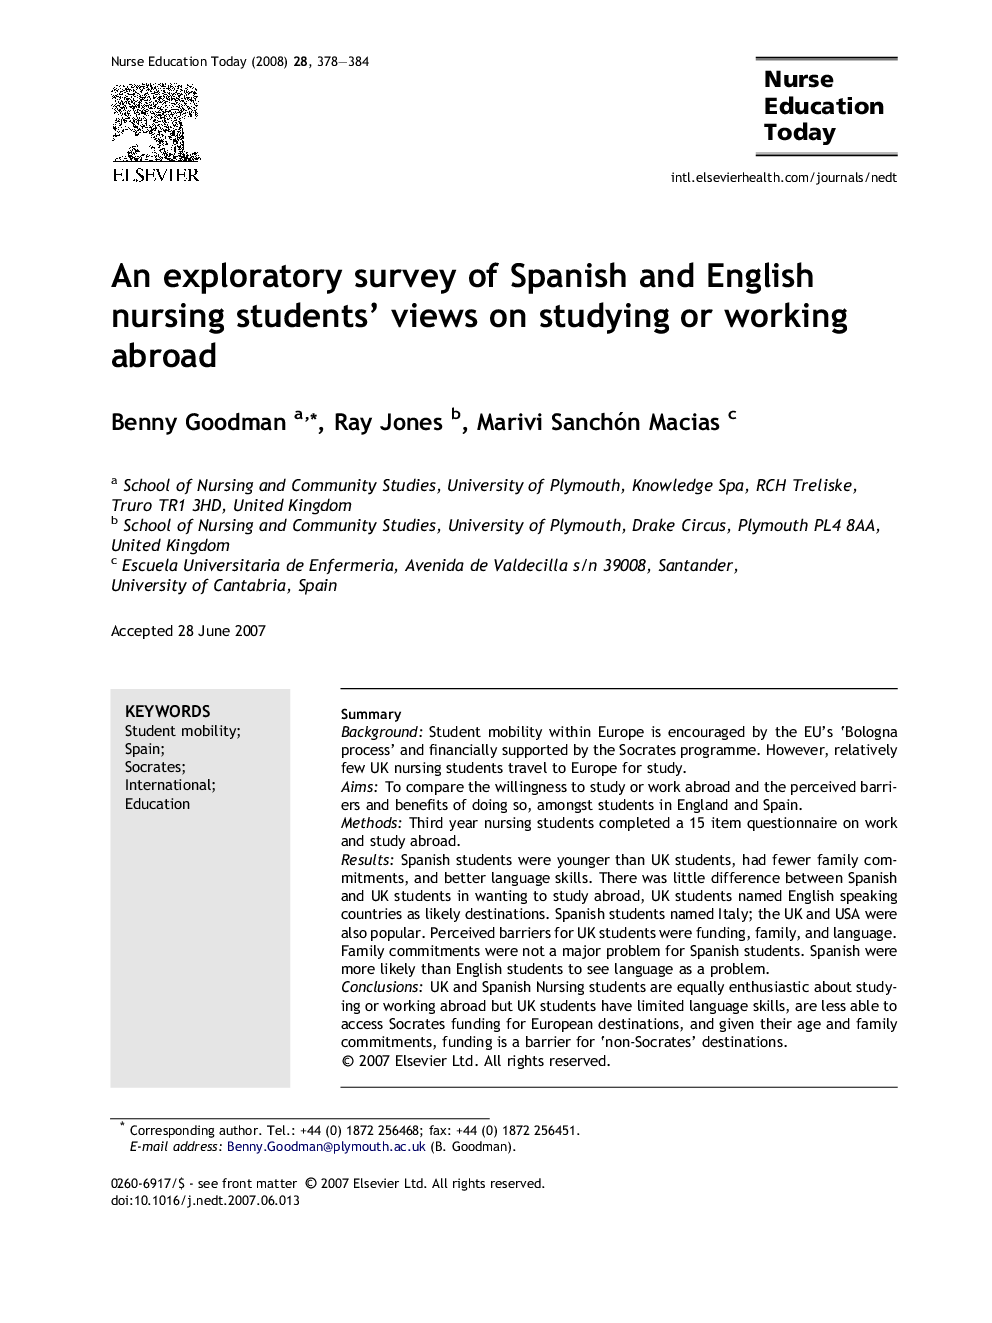 An exploratory survey of Spanish and English nursing students’ views on studying or working abroad